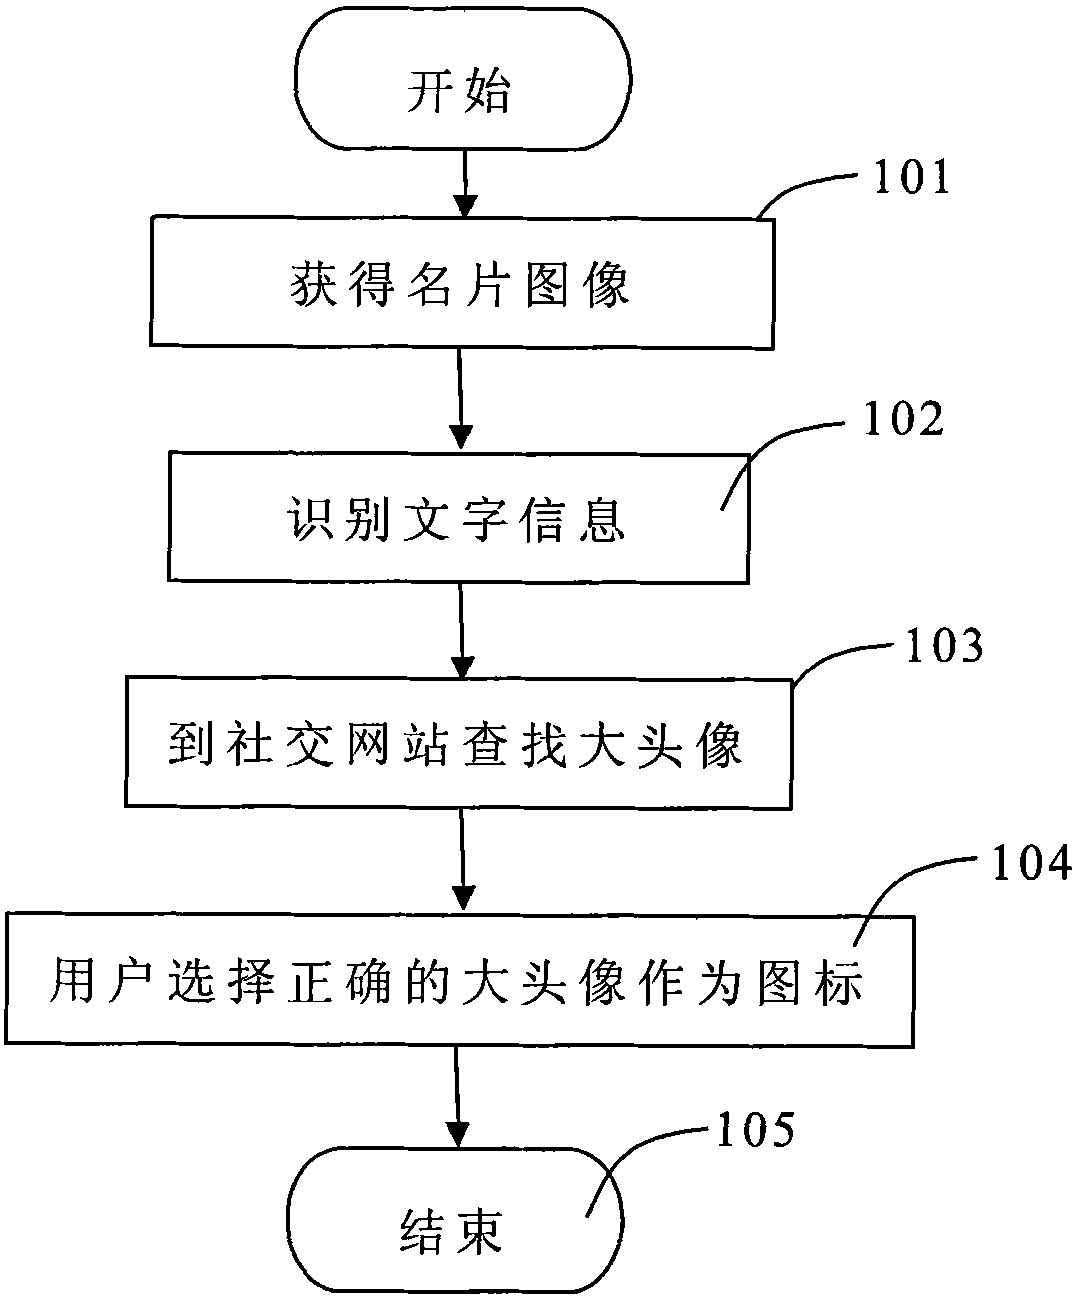 Method and system for automatically acquiring contact head image